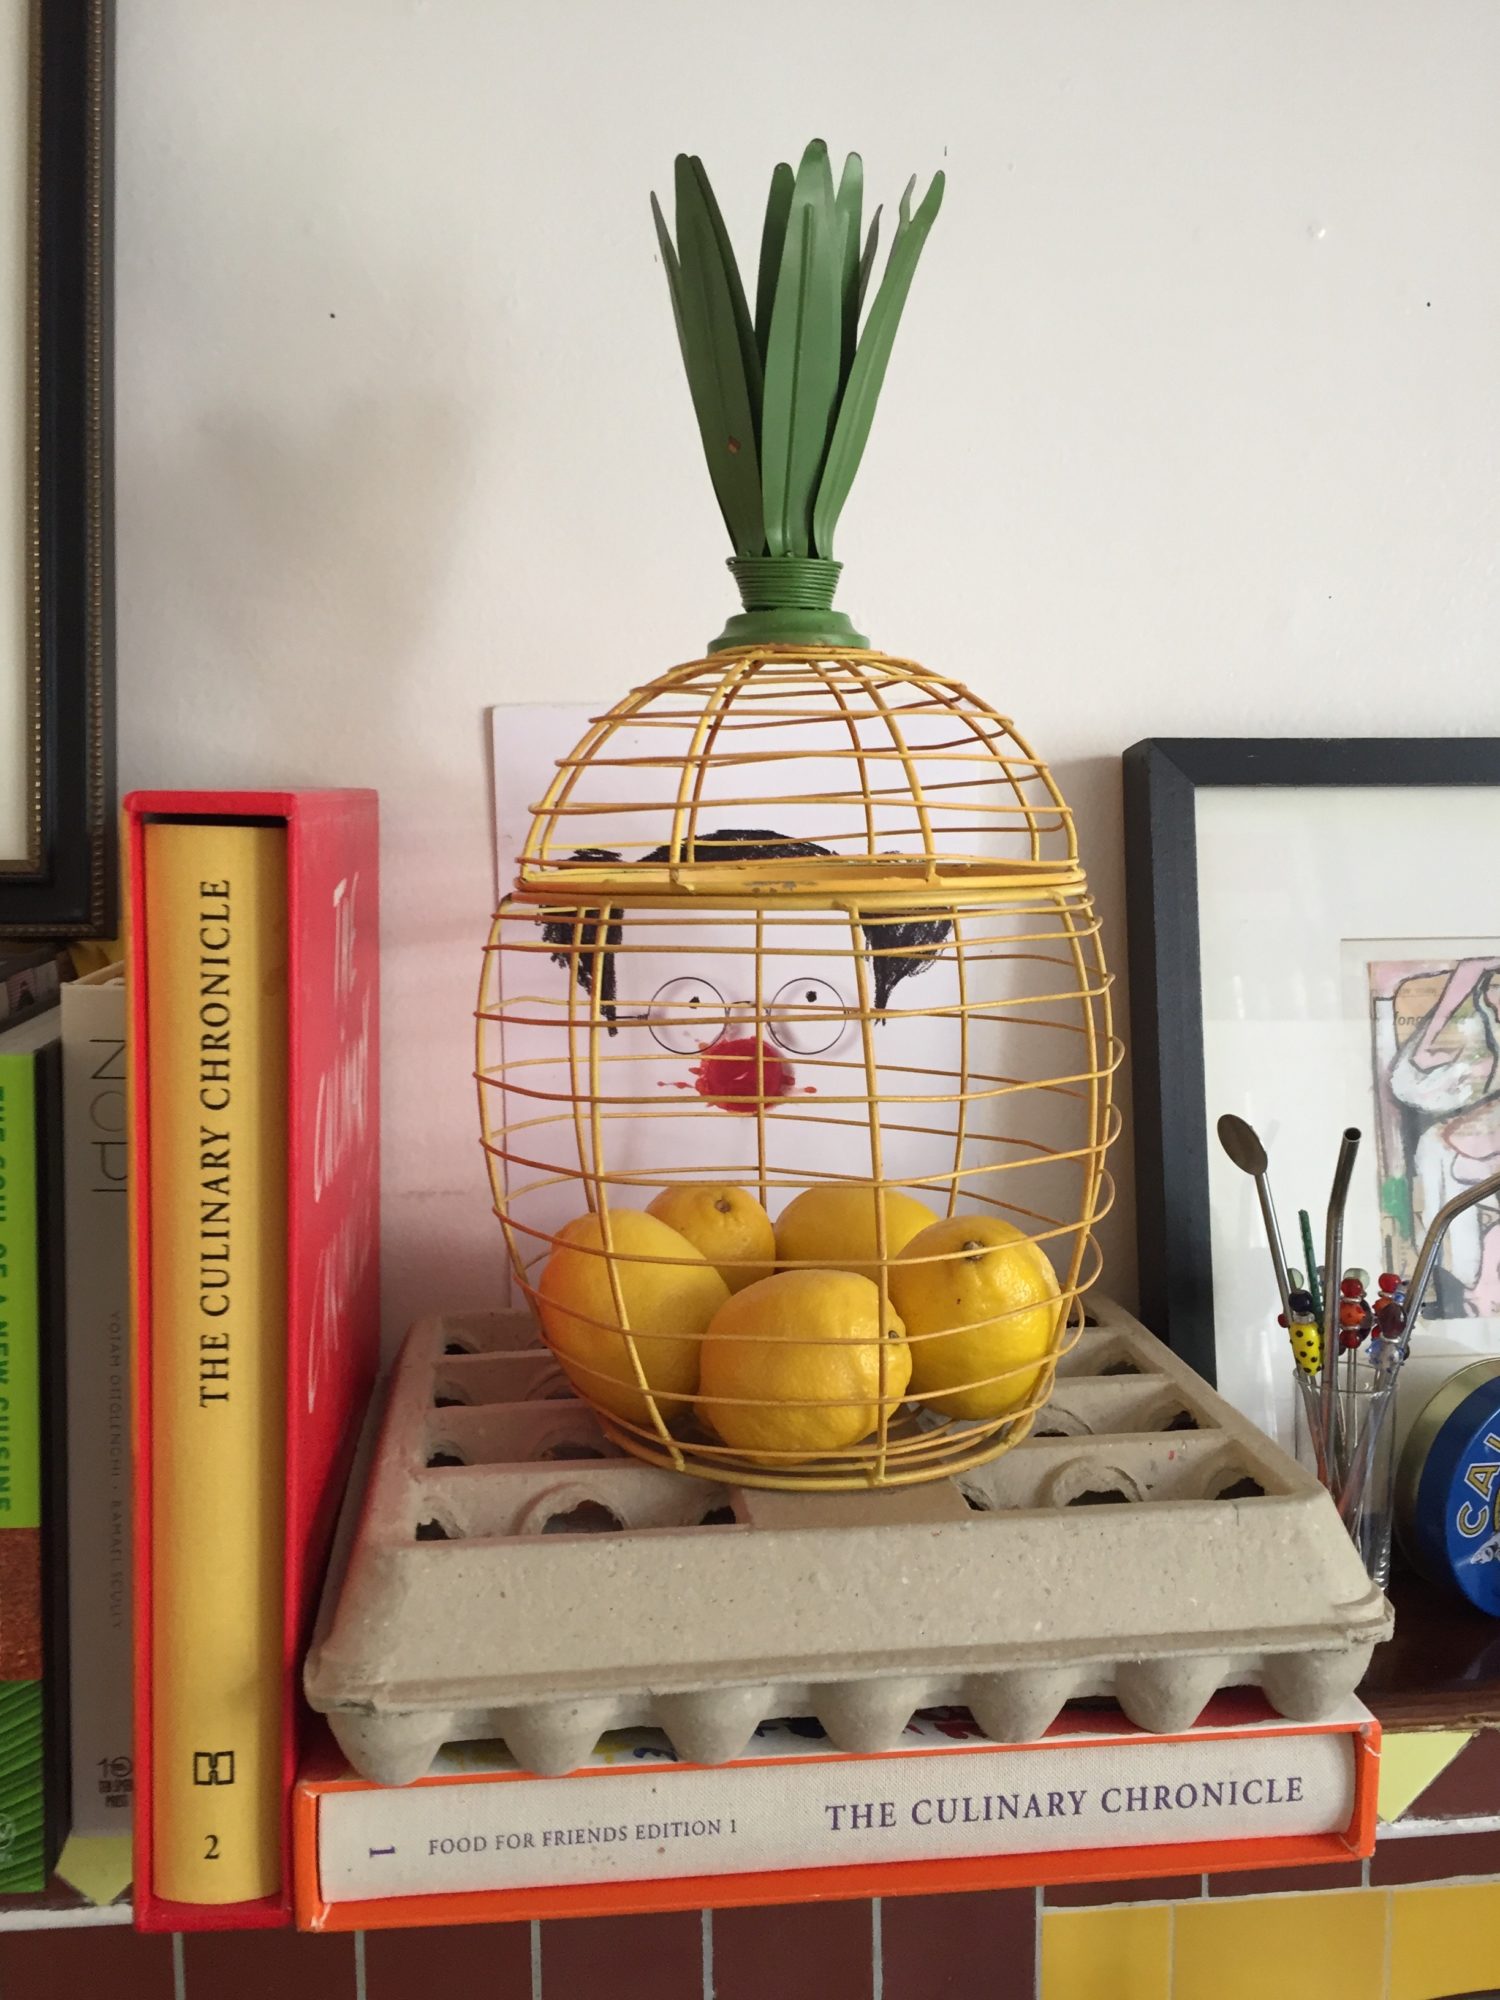 A pineapple in a cage on a shelf.